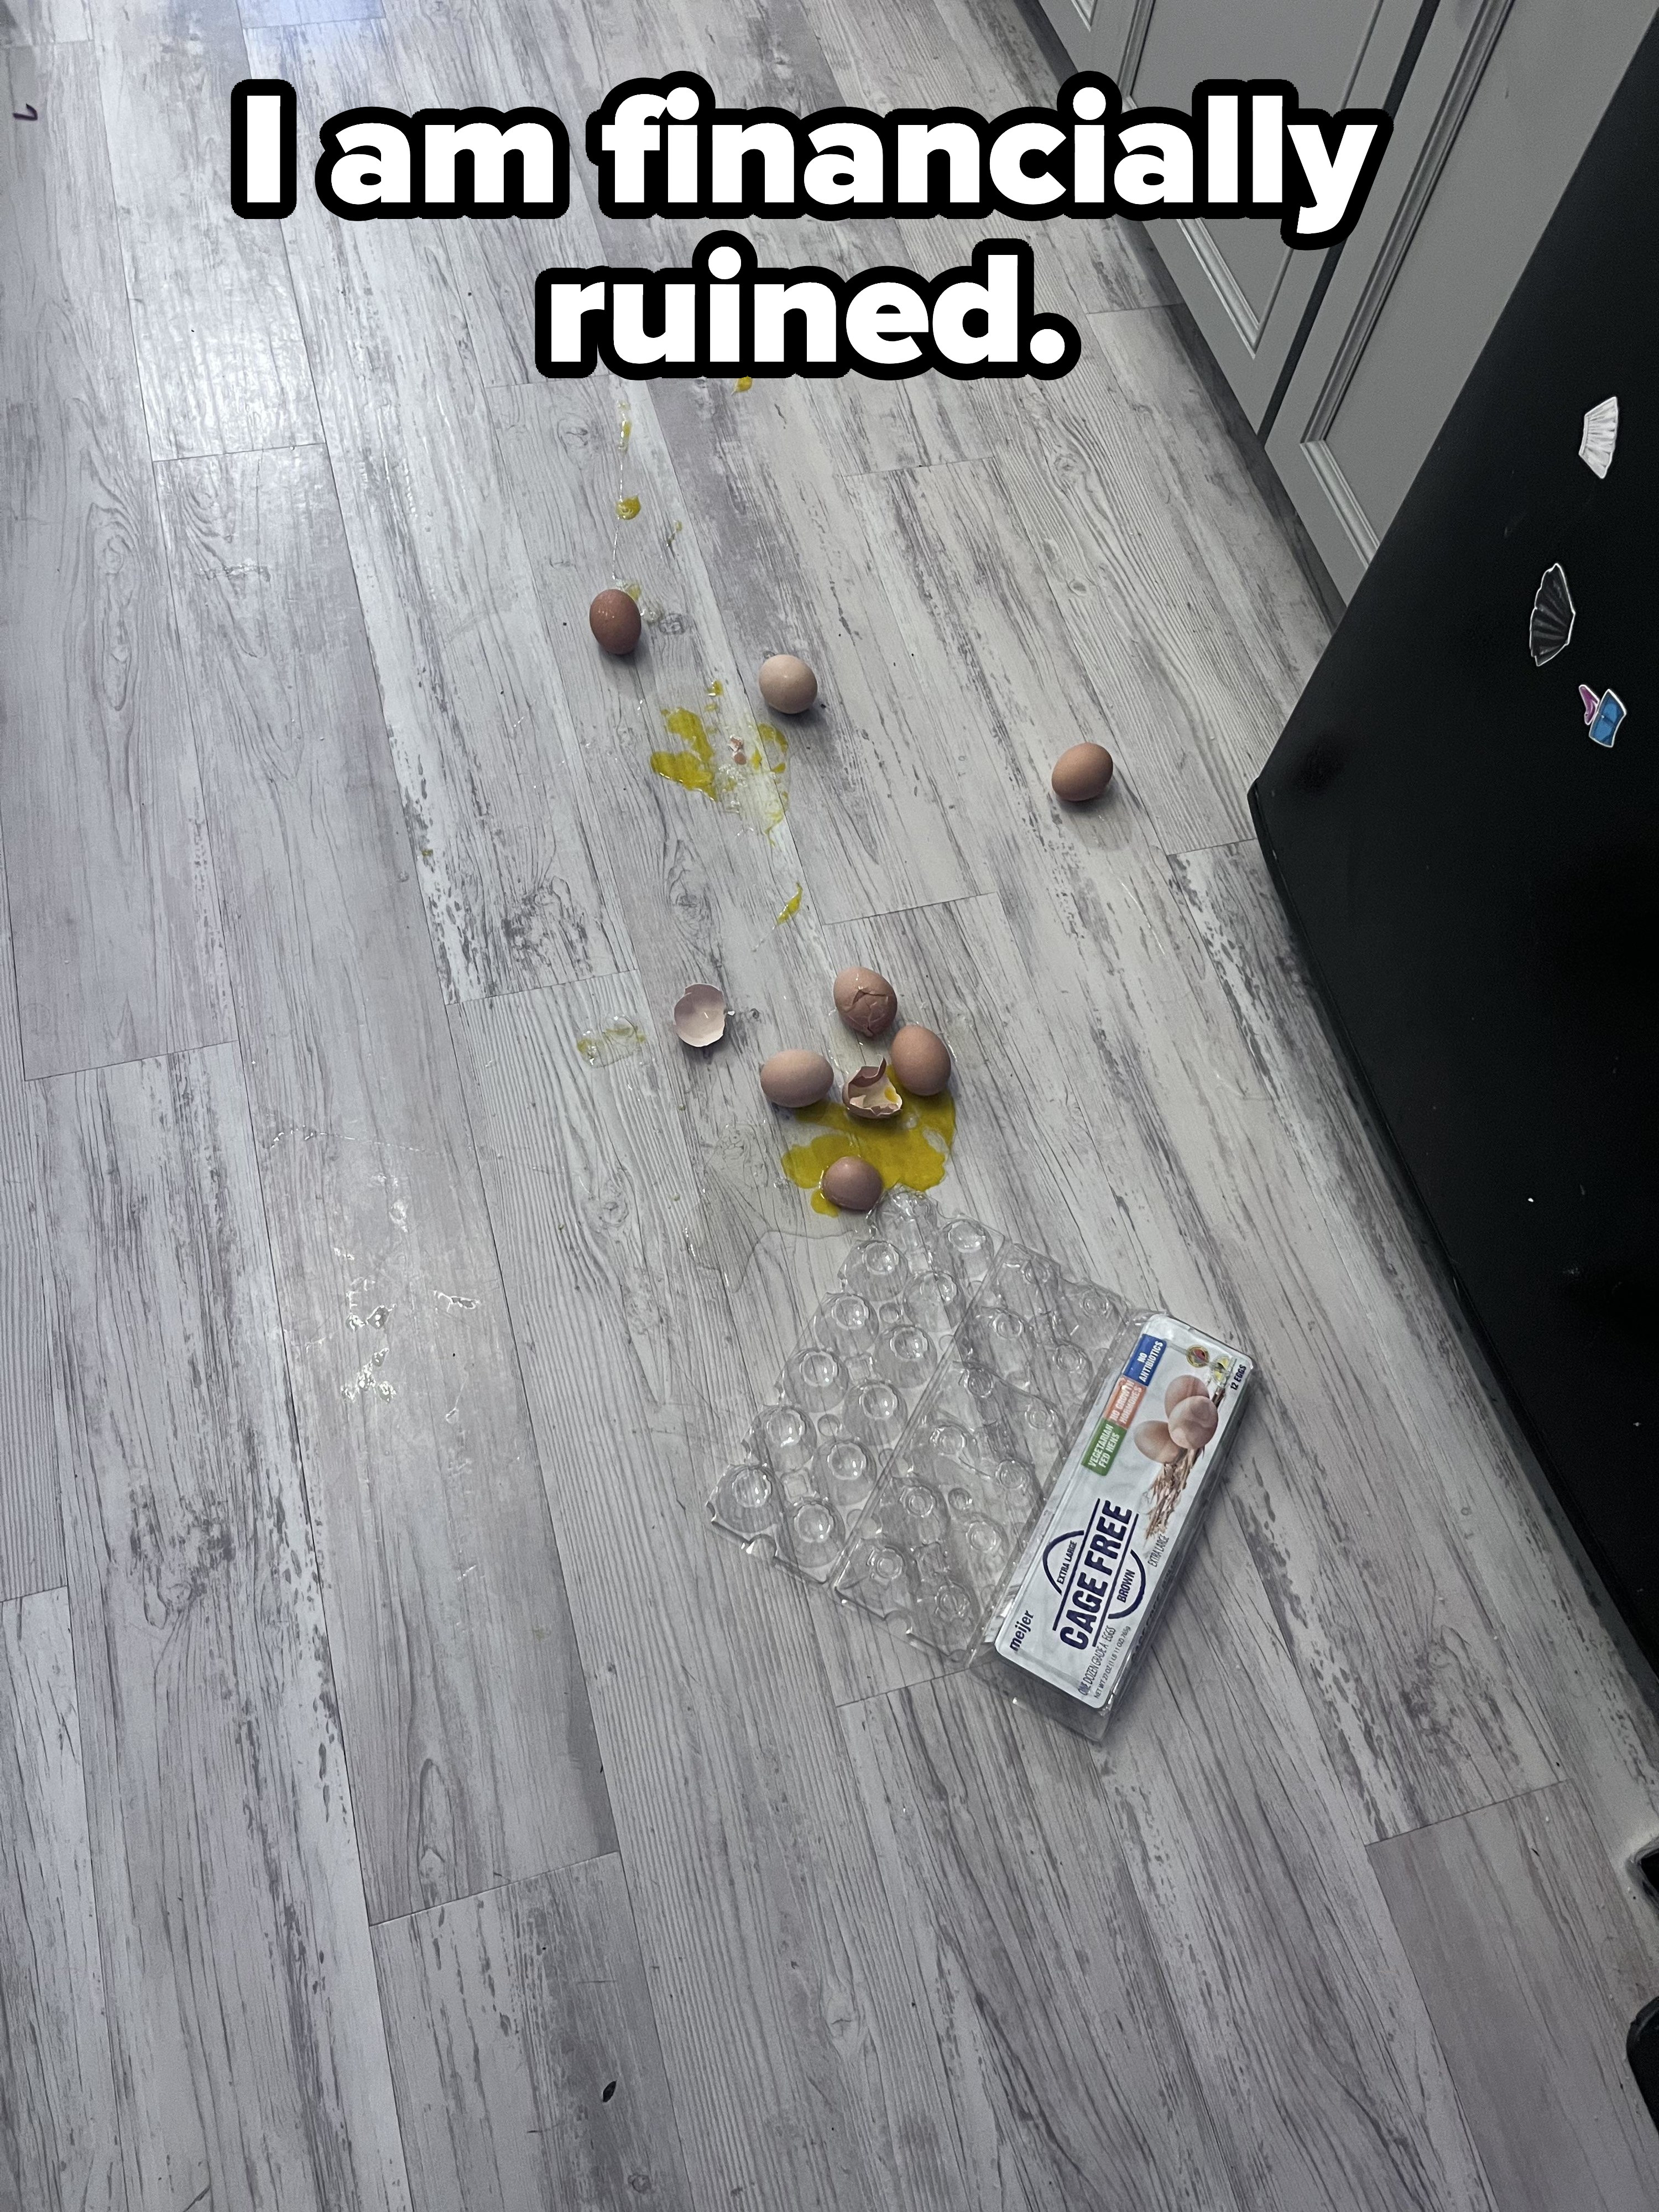 A carton of broken eggs dropped on the kitchen floor